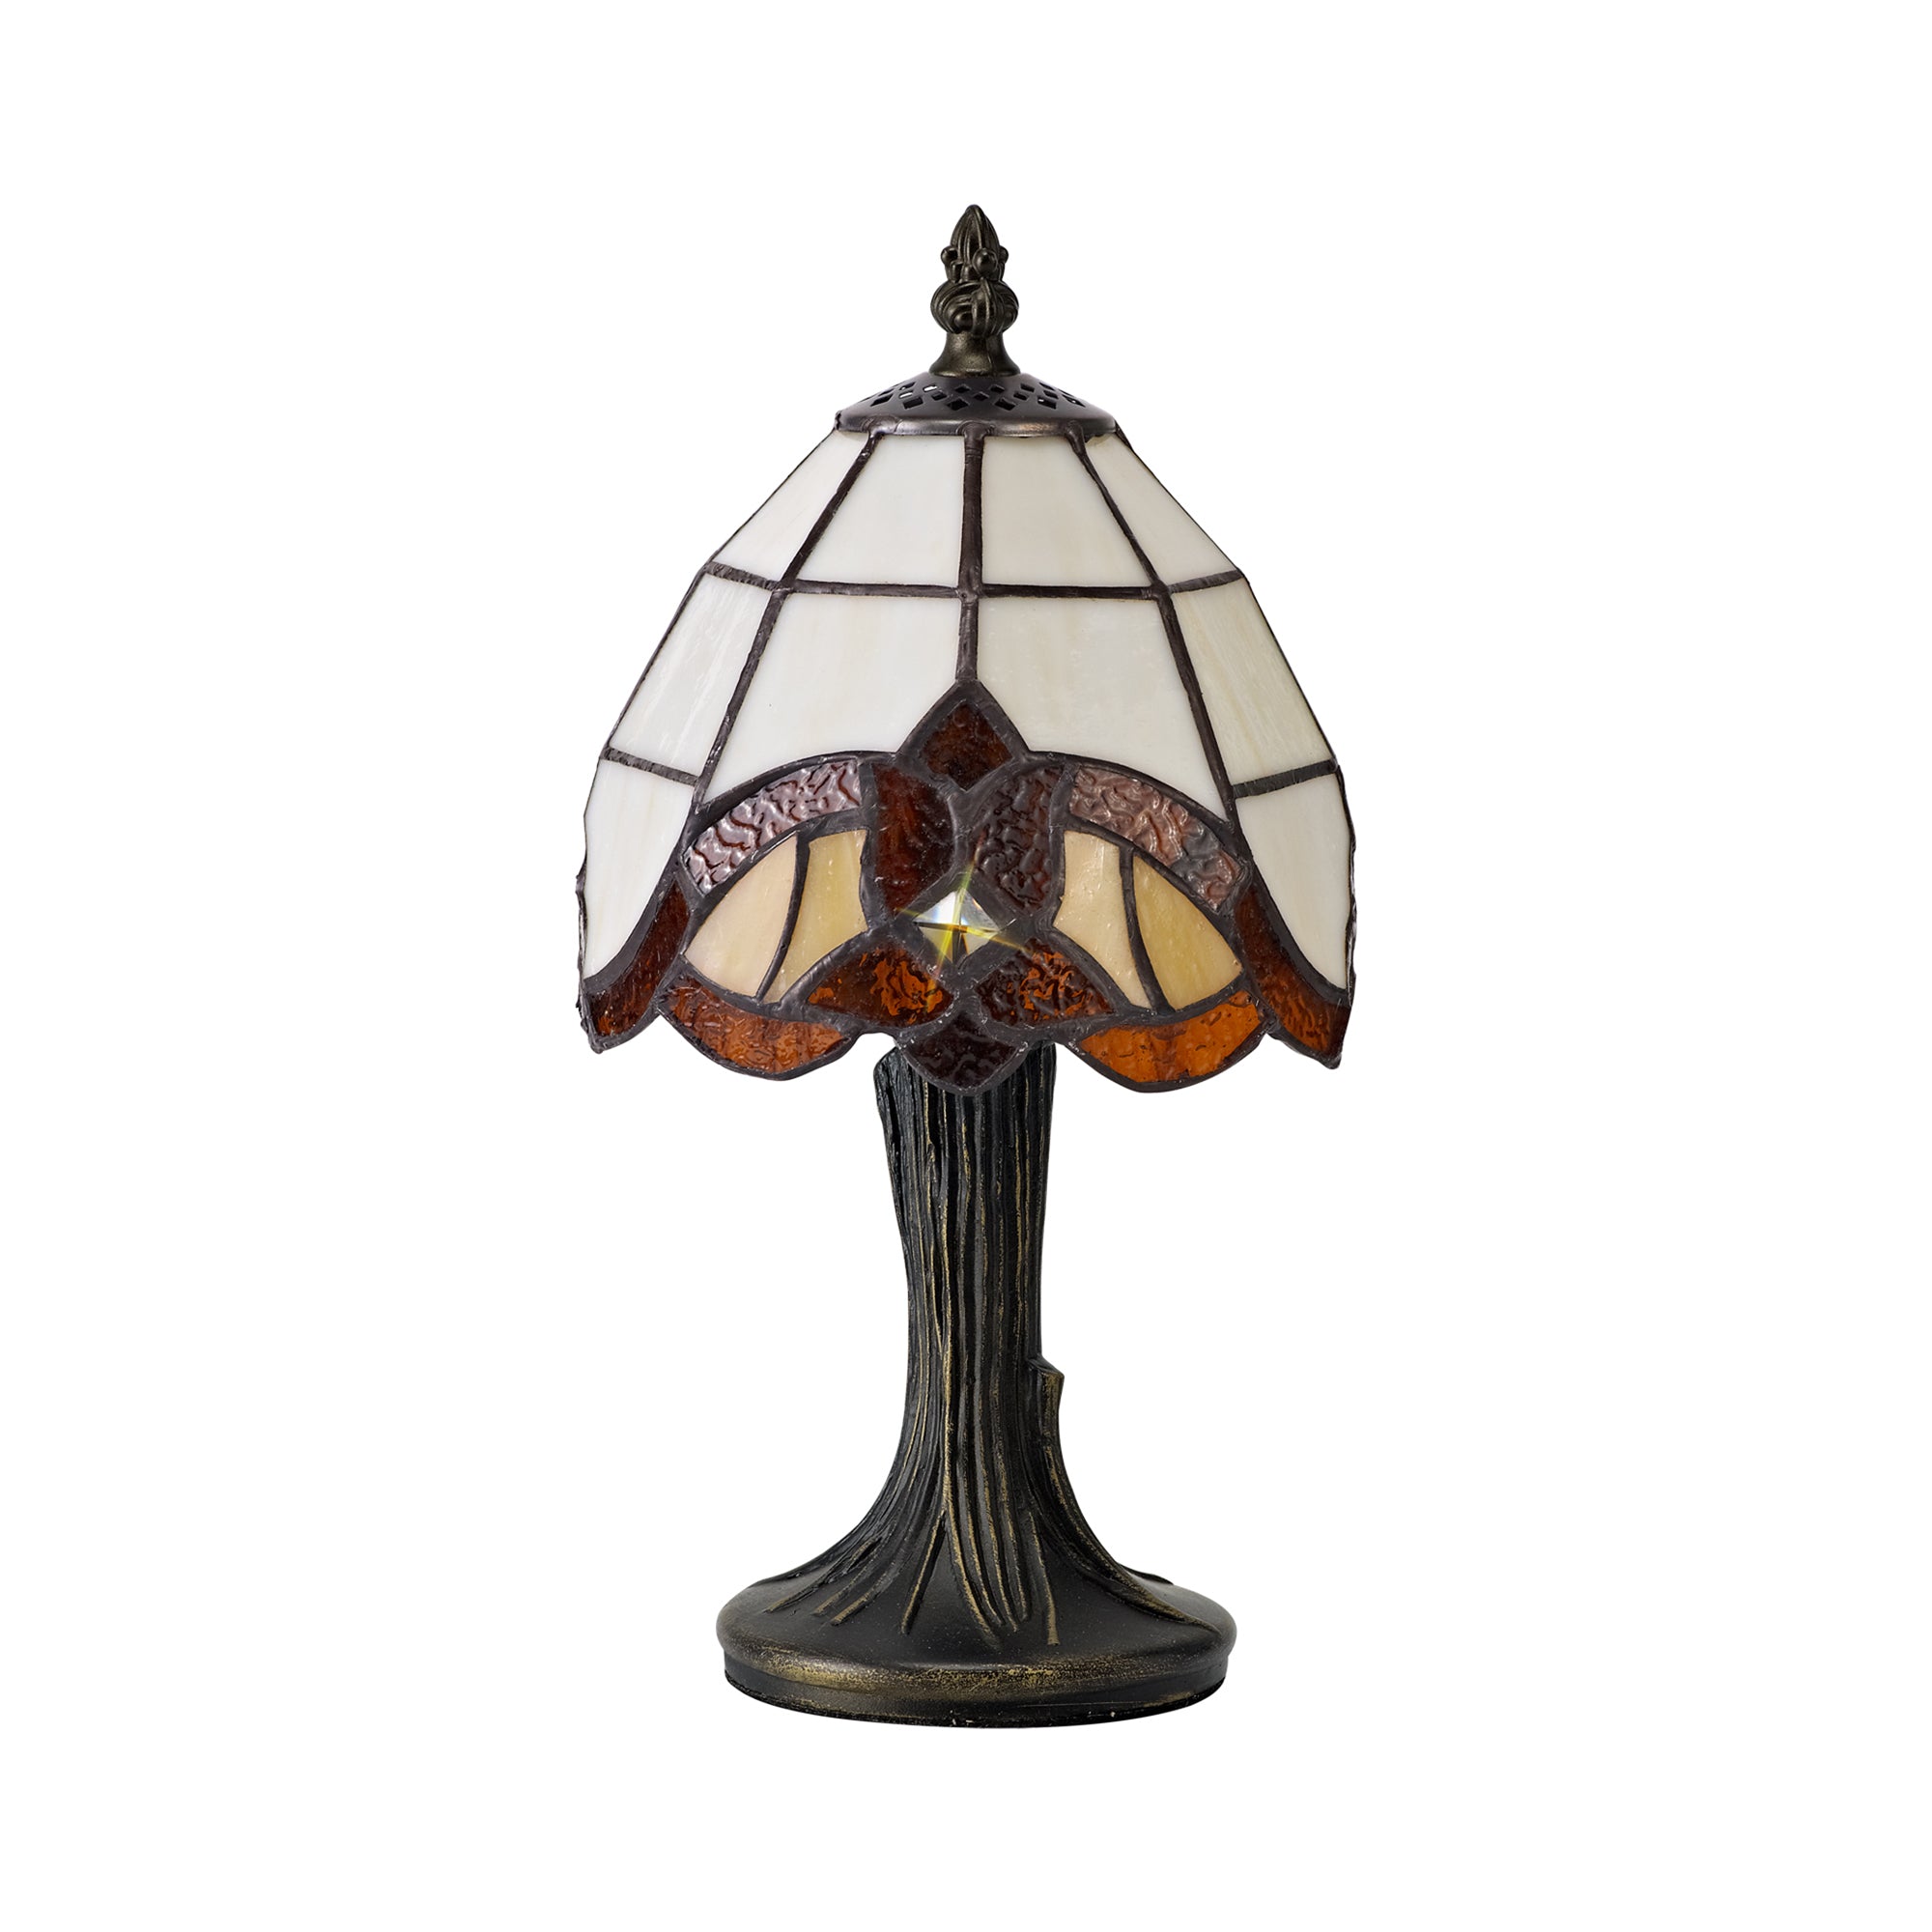 Chale Tiffany Table Lamp, 1 x E14, Crealm/Amber/Clear Crystal Shade